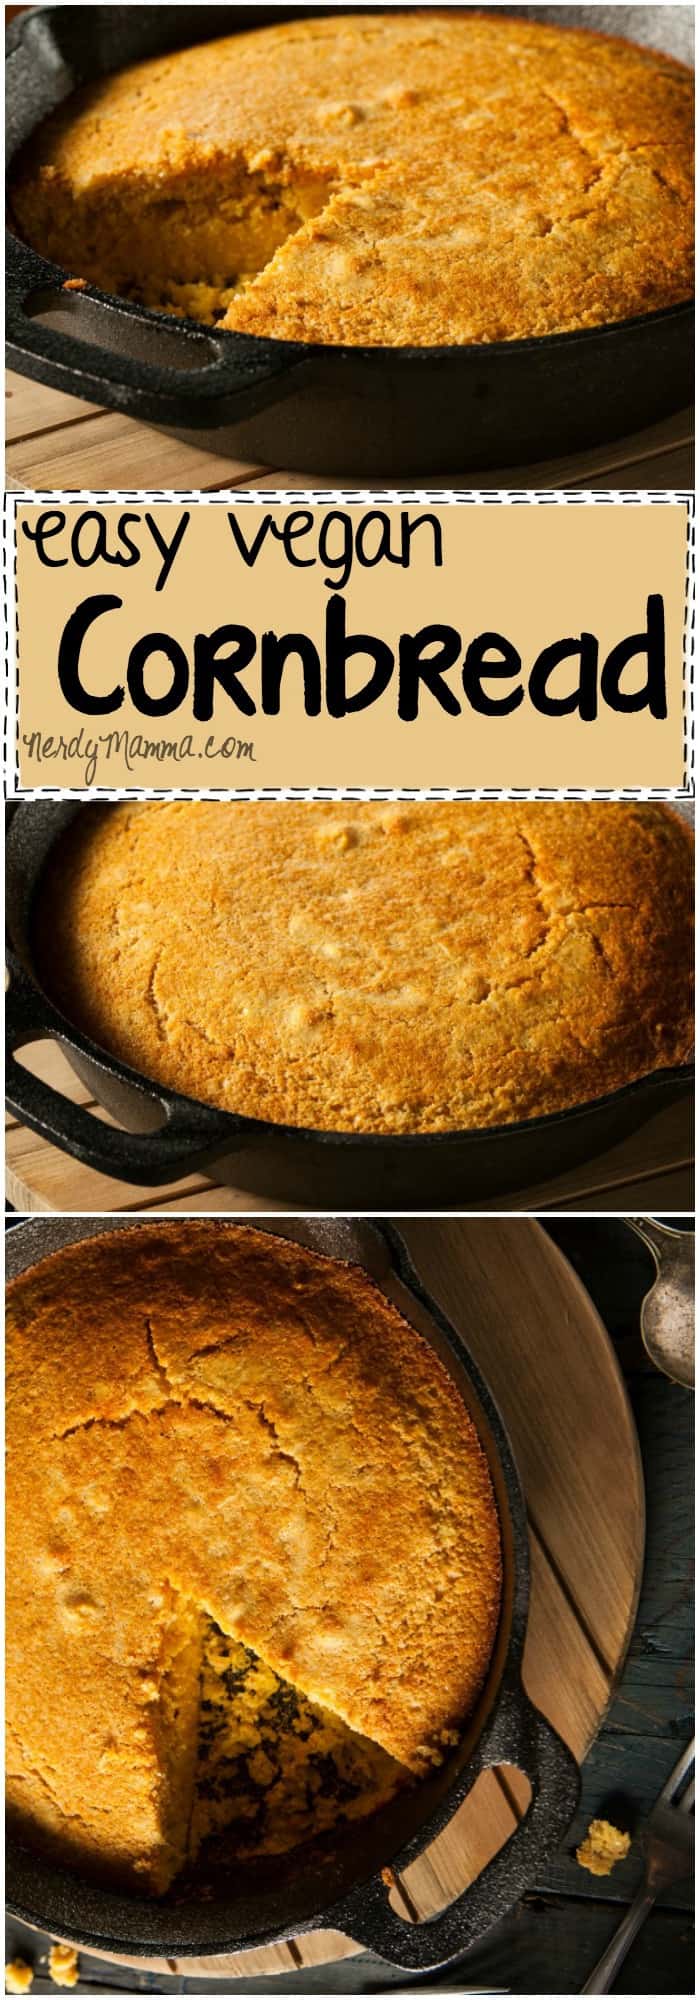 This recipe for vegan cornbread is so easy. Its a soft, fluffy bread with just the right amount of yummy...LOVE!